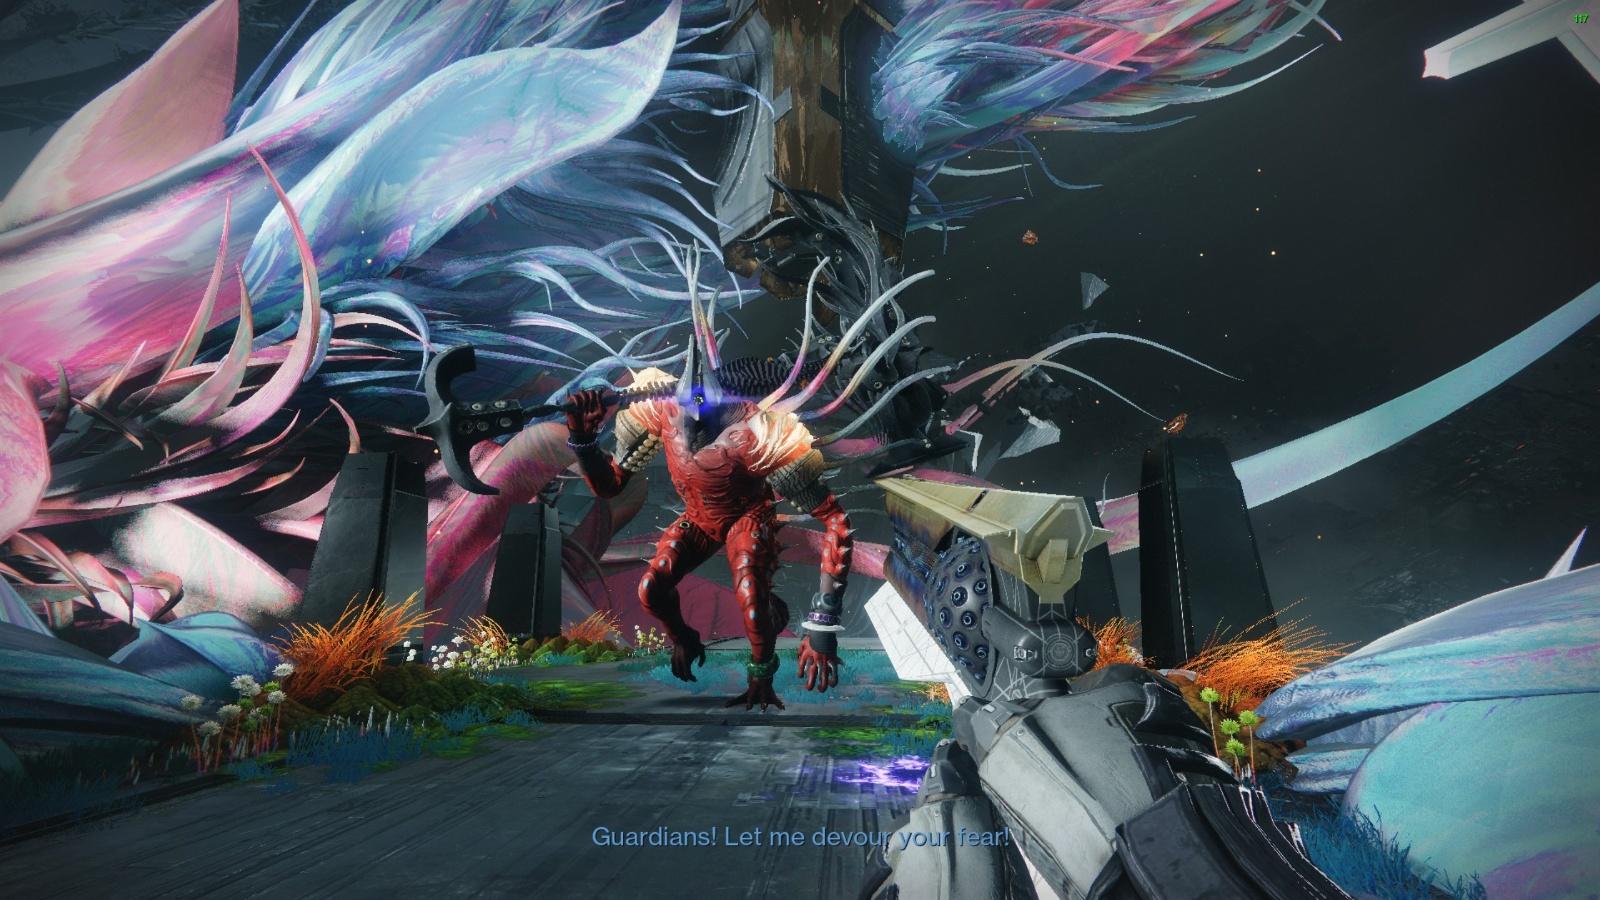 A screenshot from the game Destiny 2.